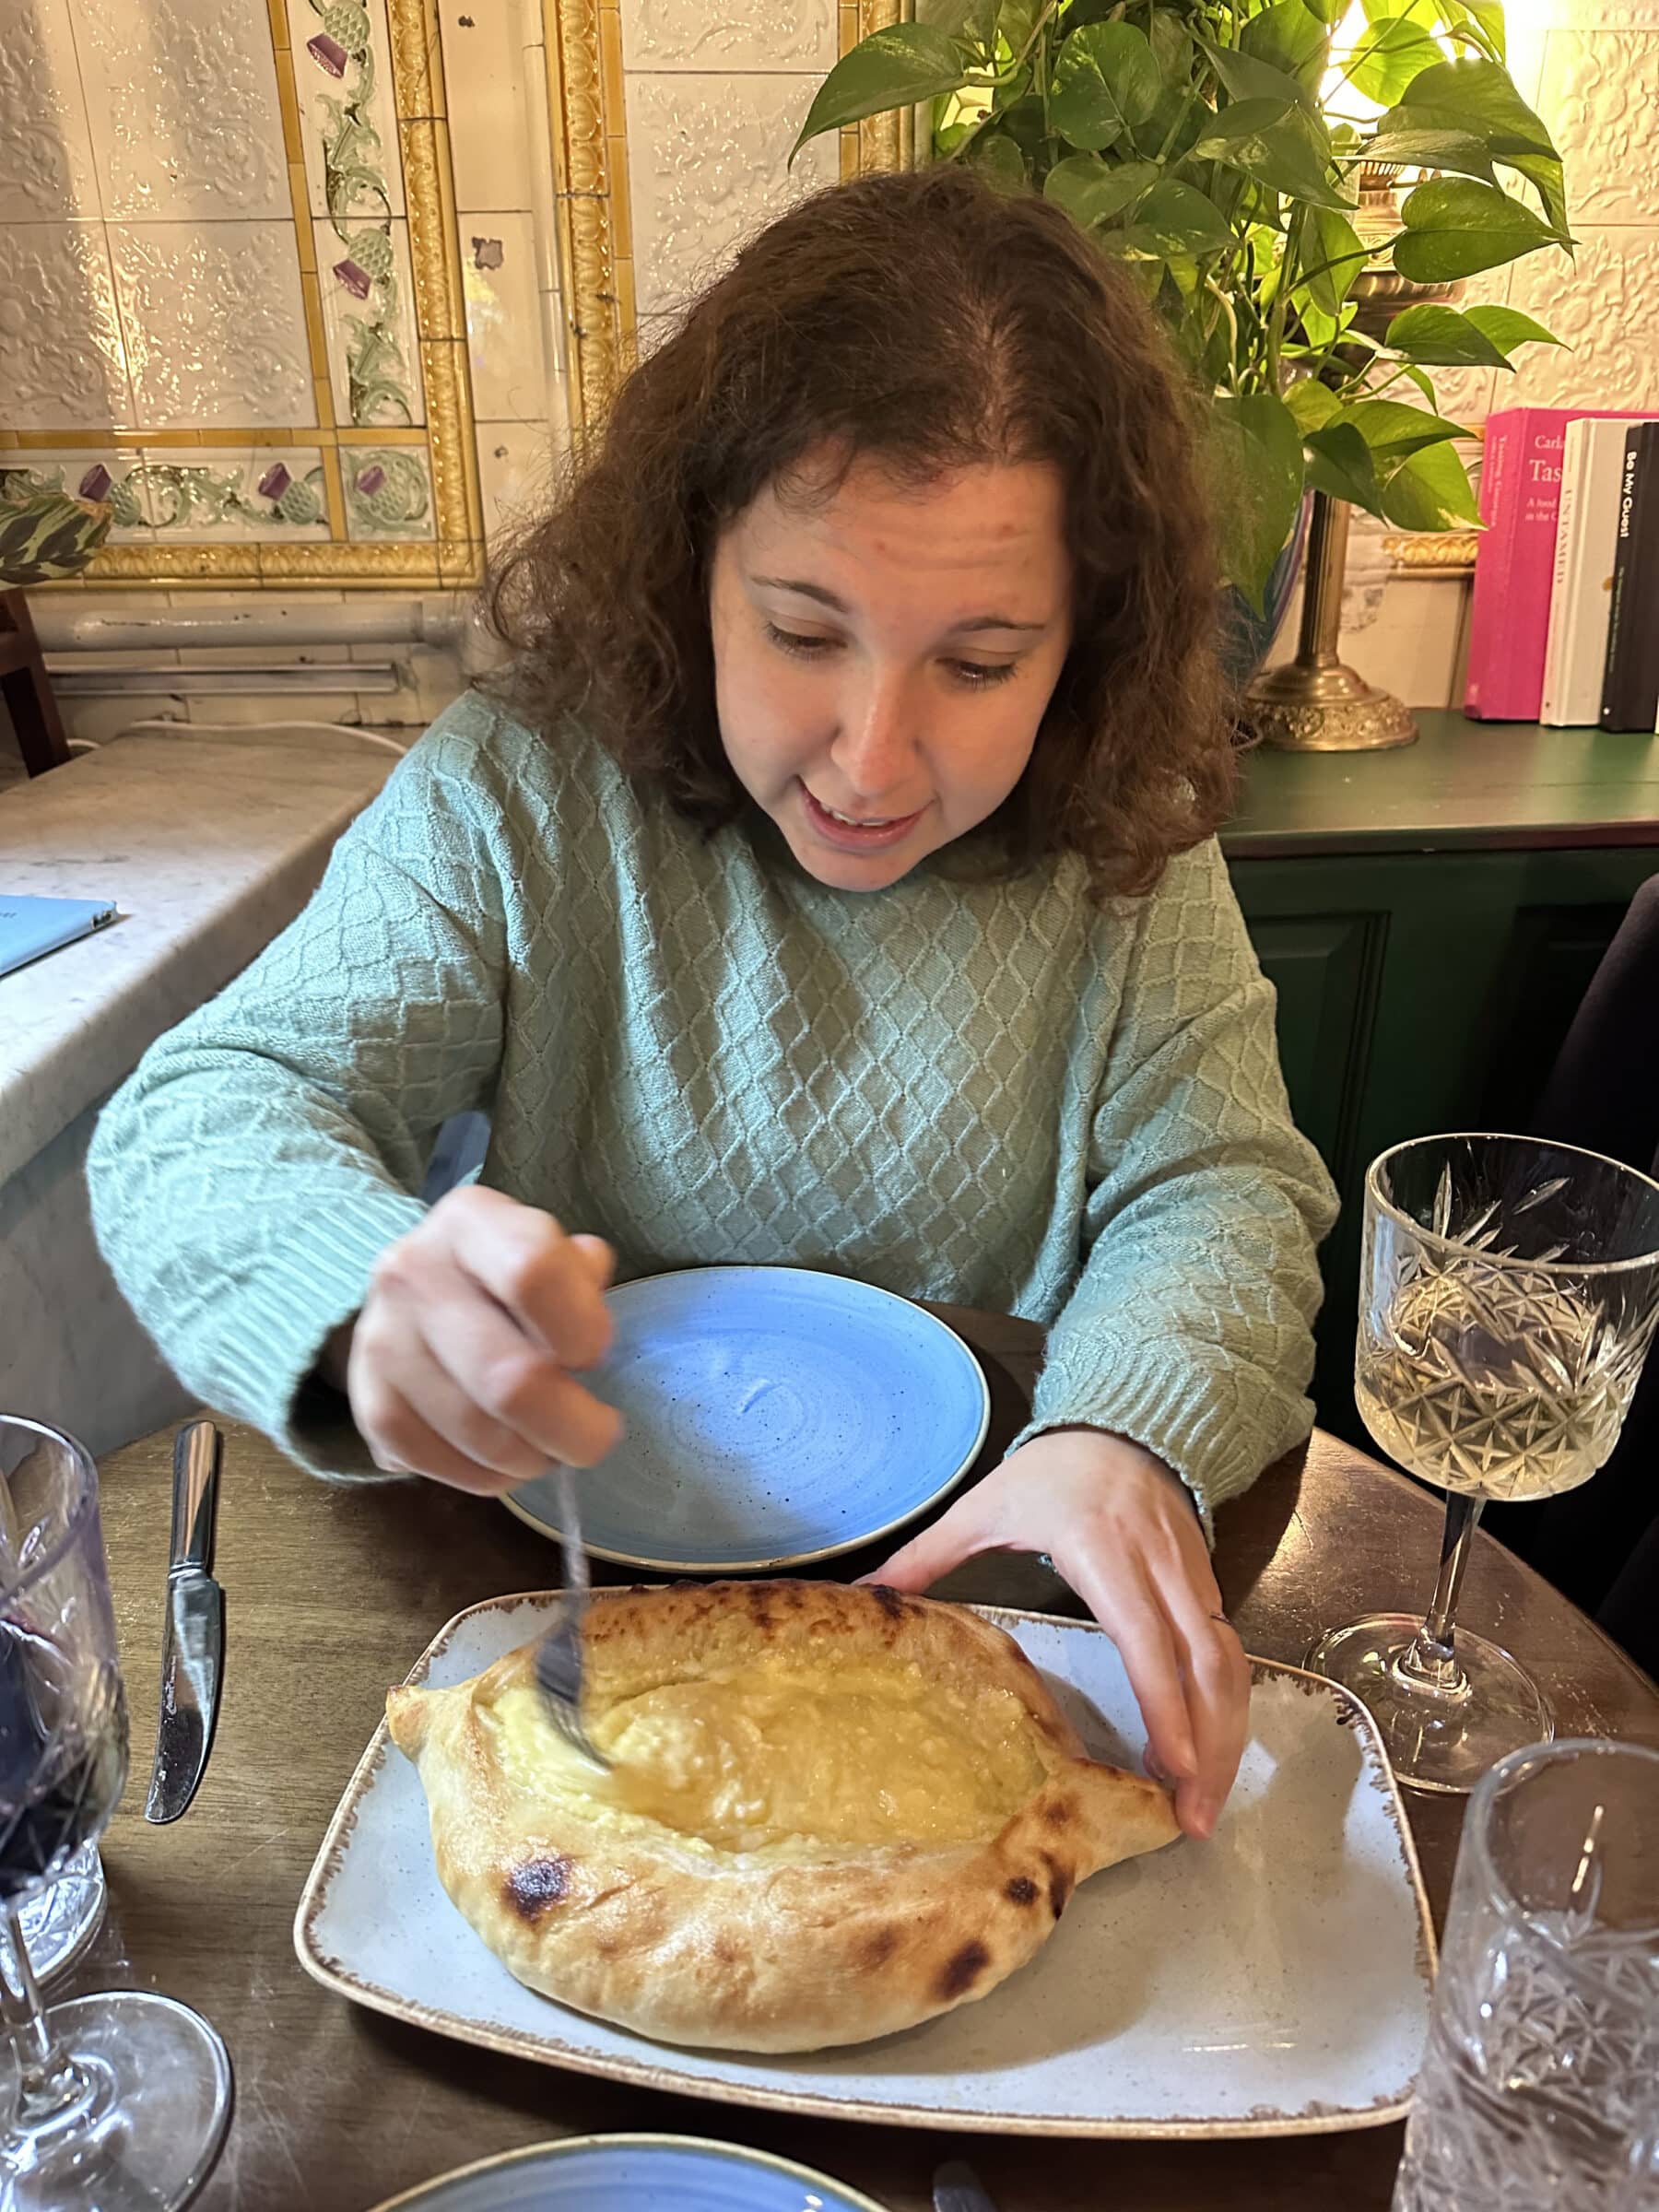 Making sure our khachapuri was just right